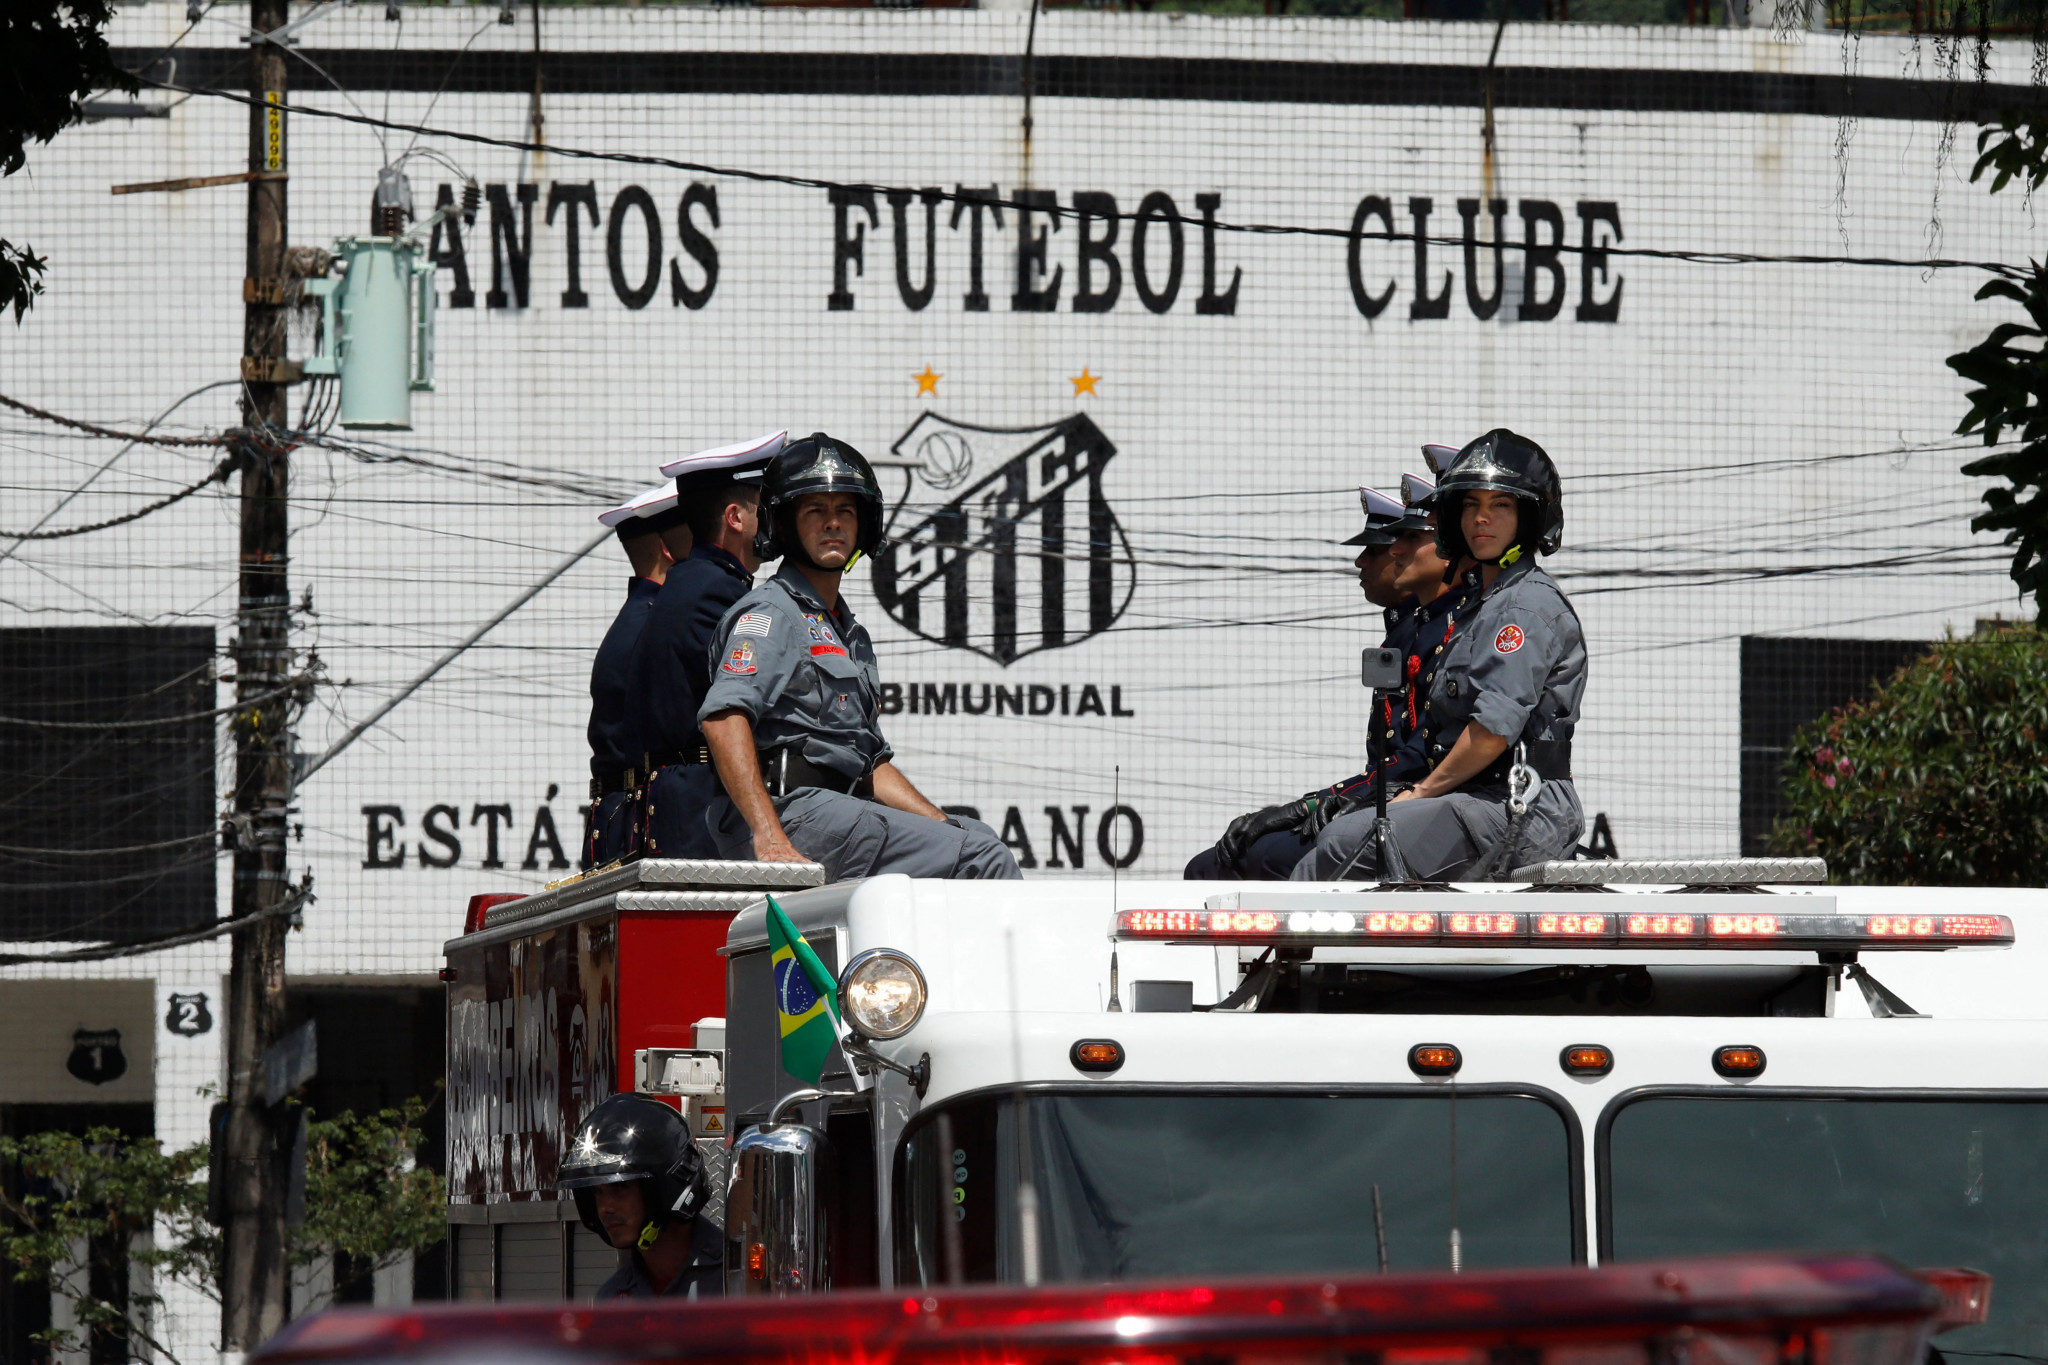 The ceremony was held at the home of Santos FC ©Getty Images